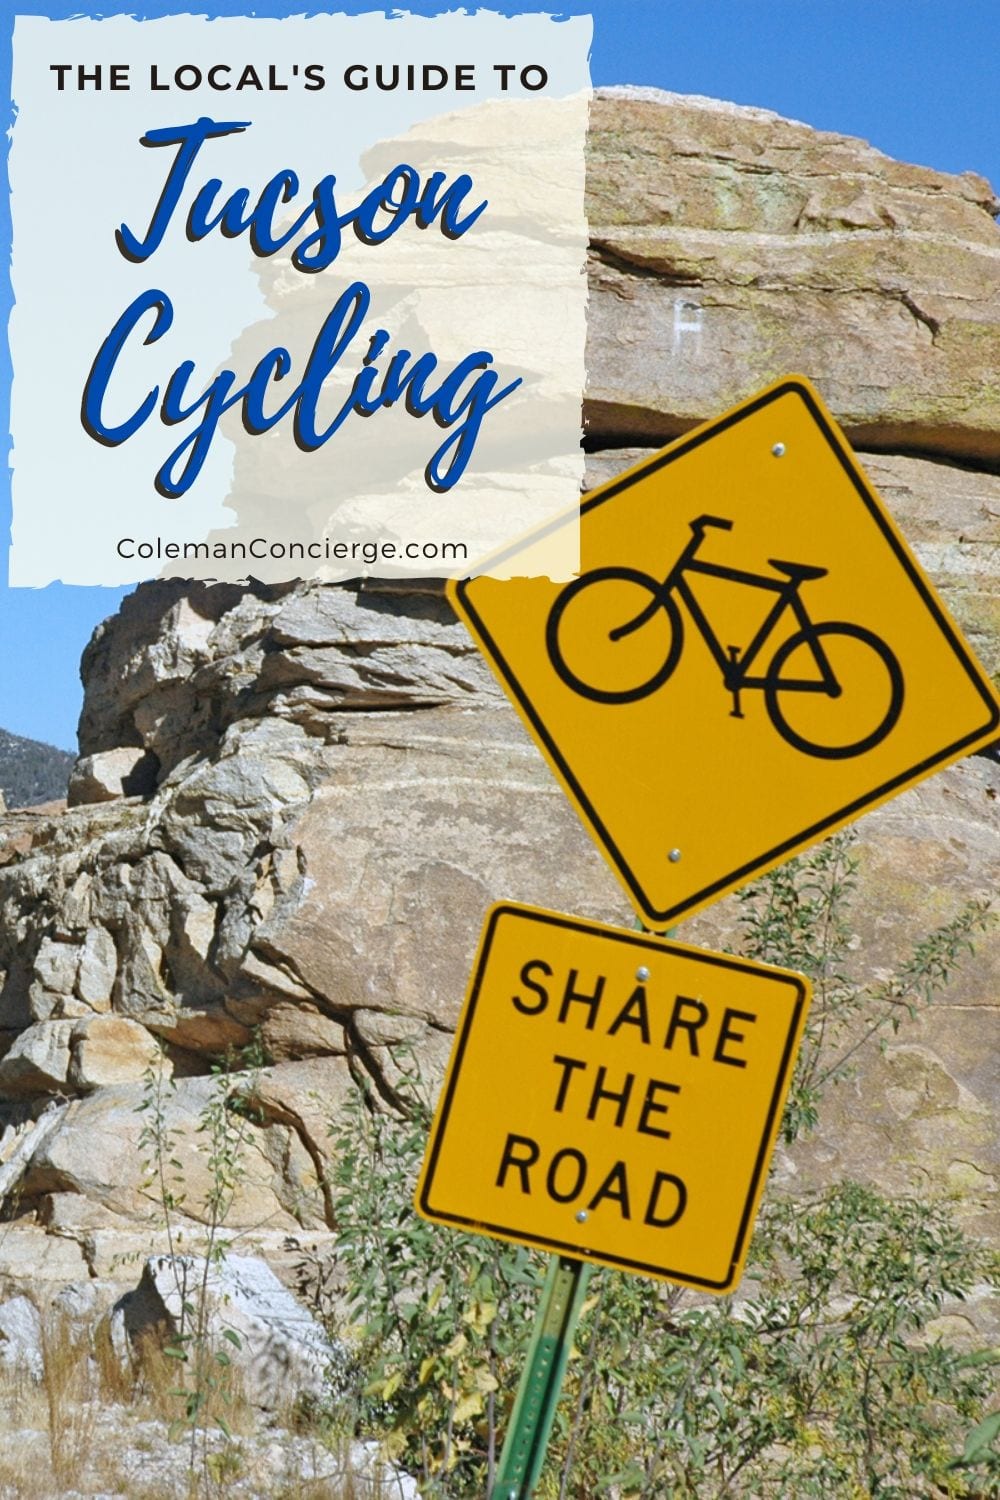 Share the road bike sign